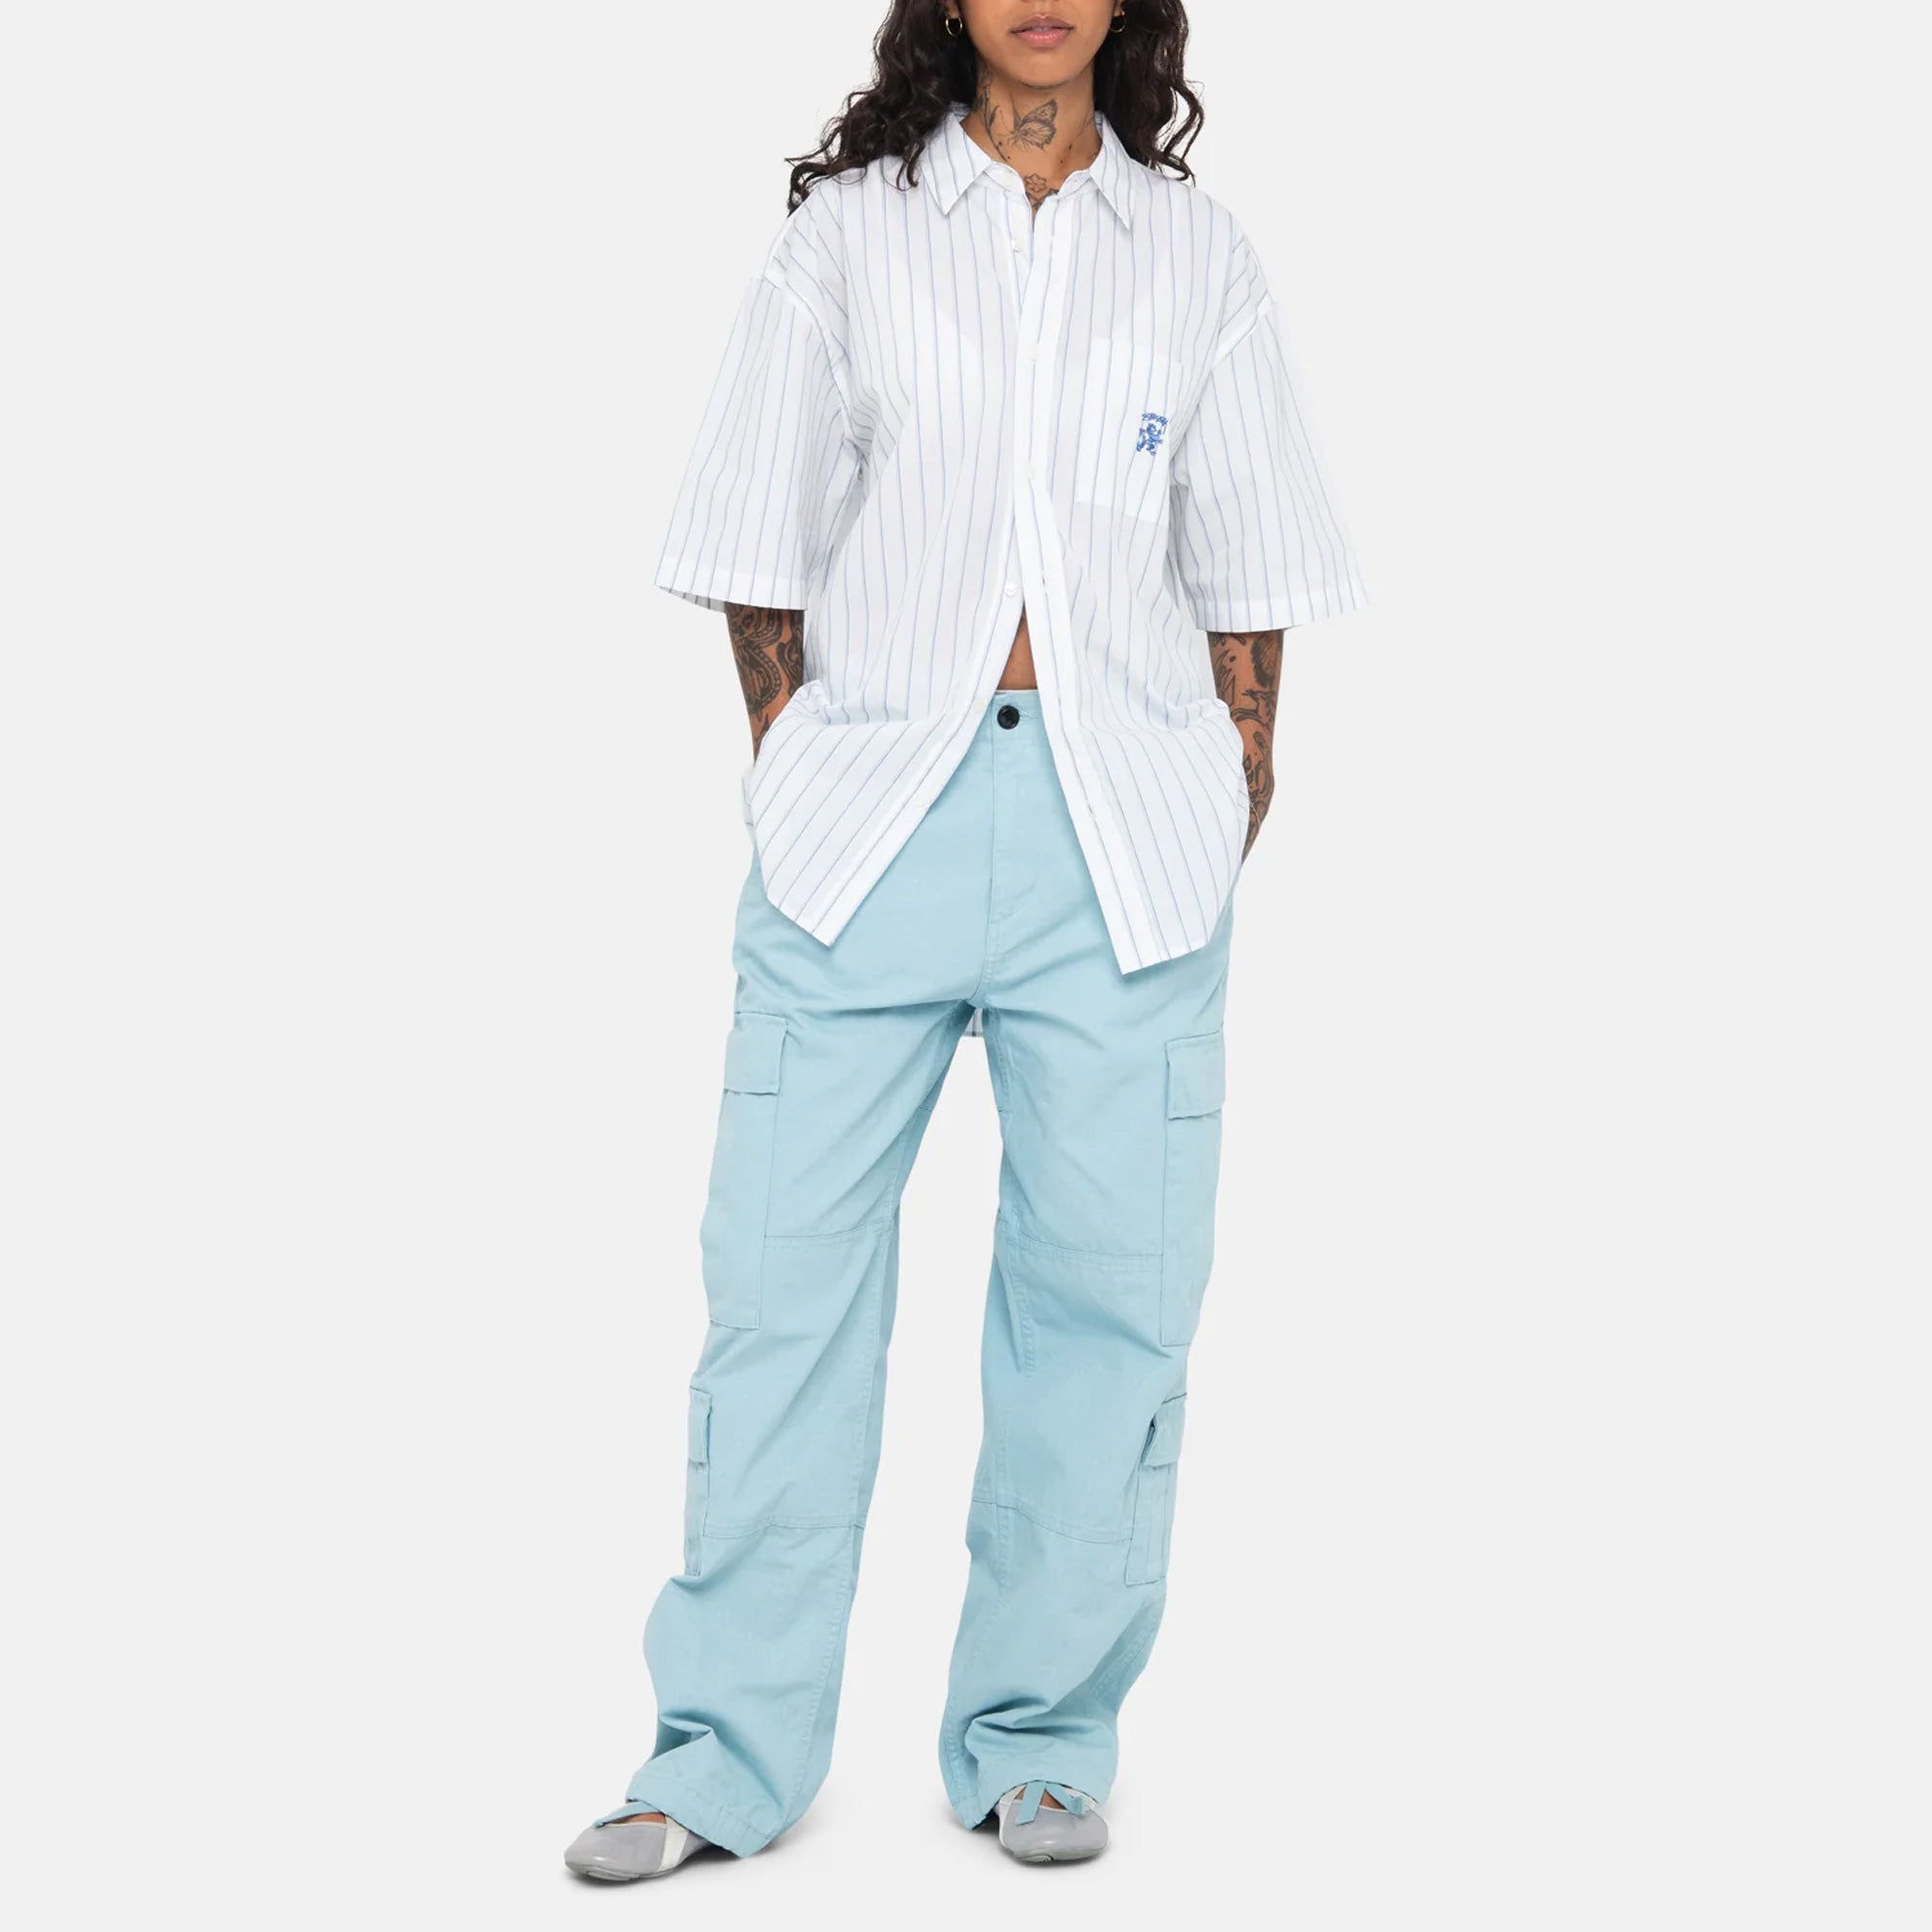 Full body front photo of model wearing the Surplus Ripstop Cargo Pant - Aquamarine.